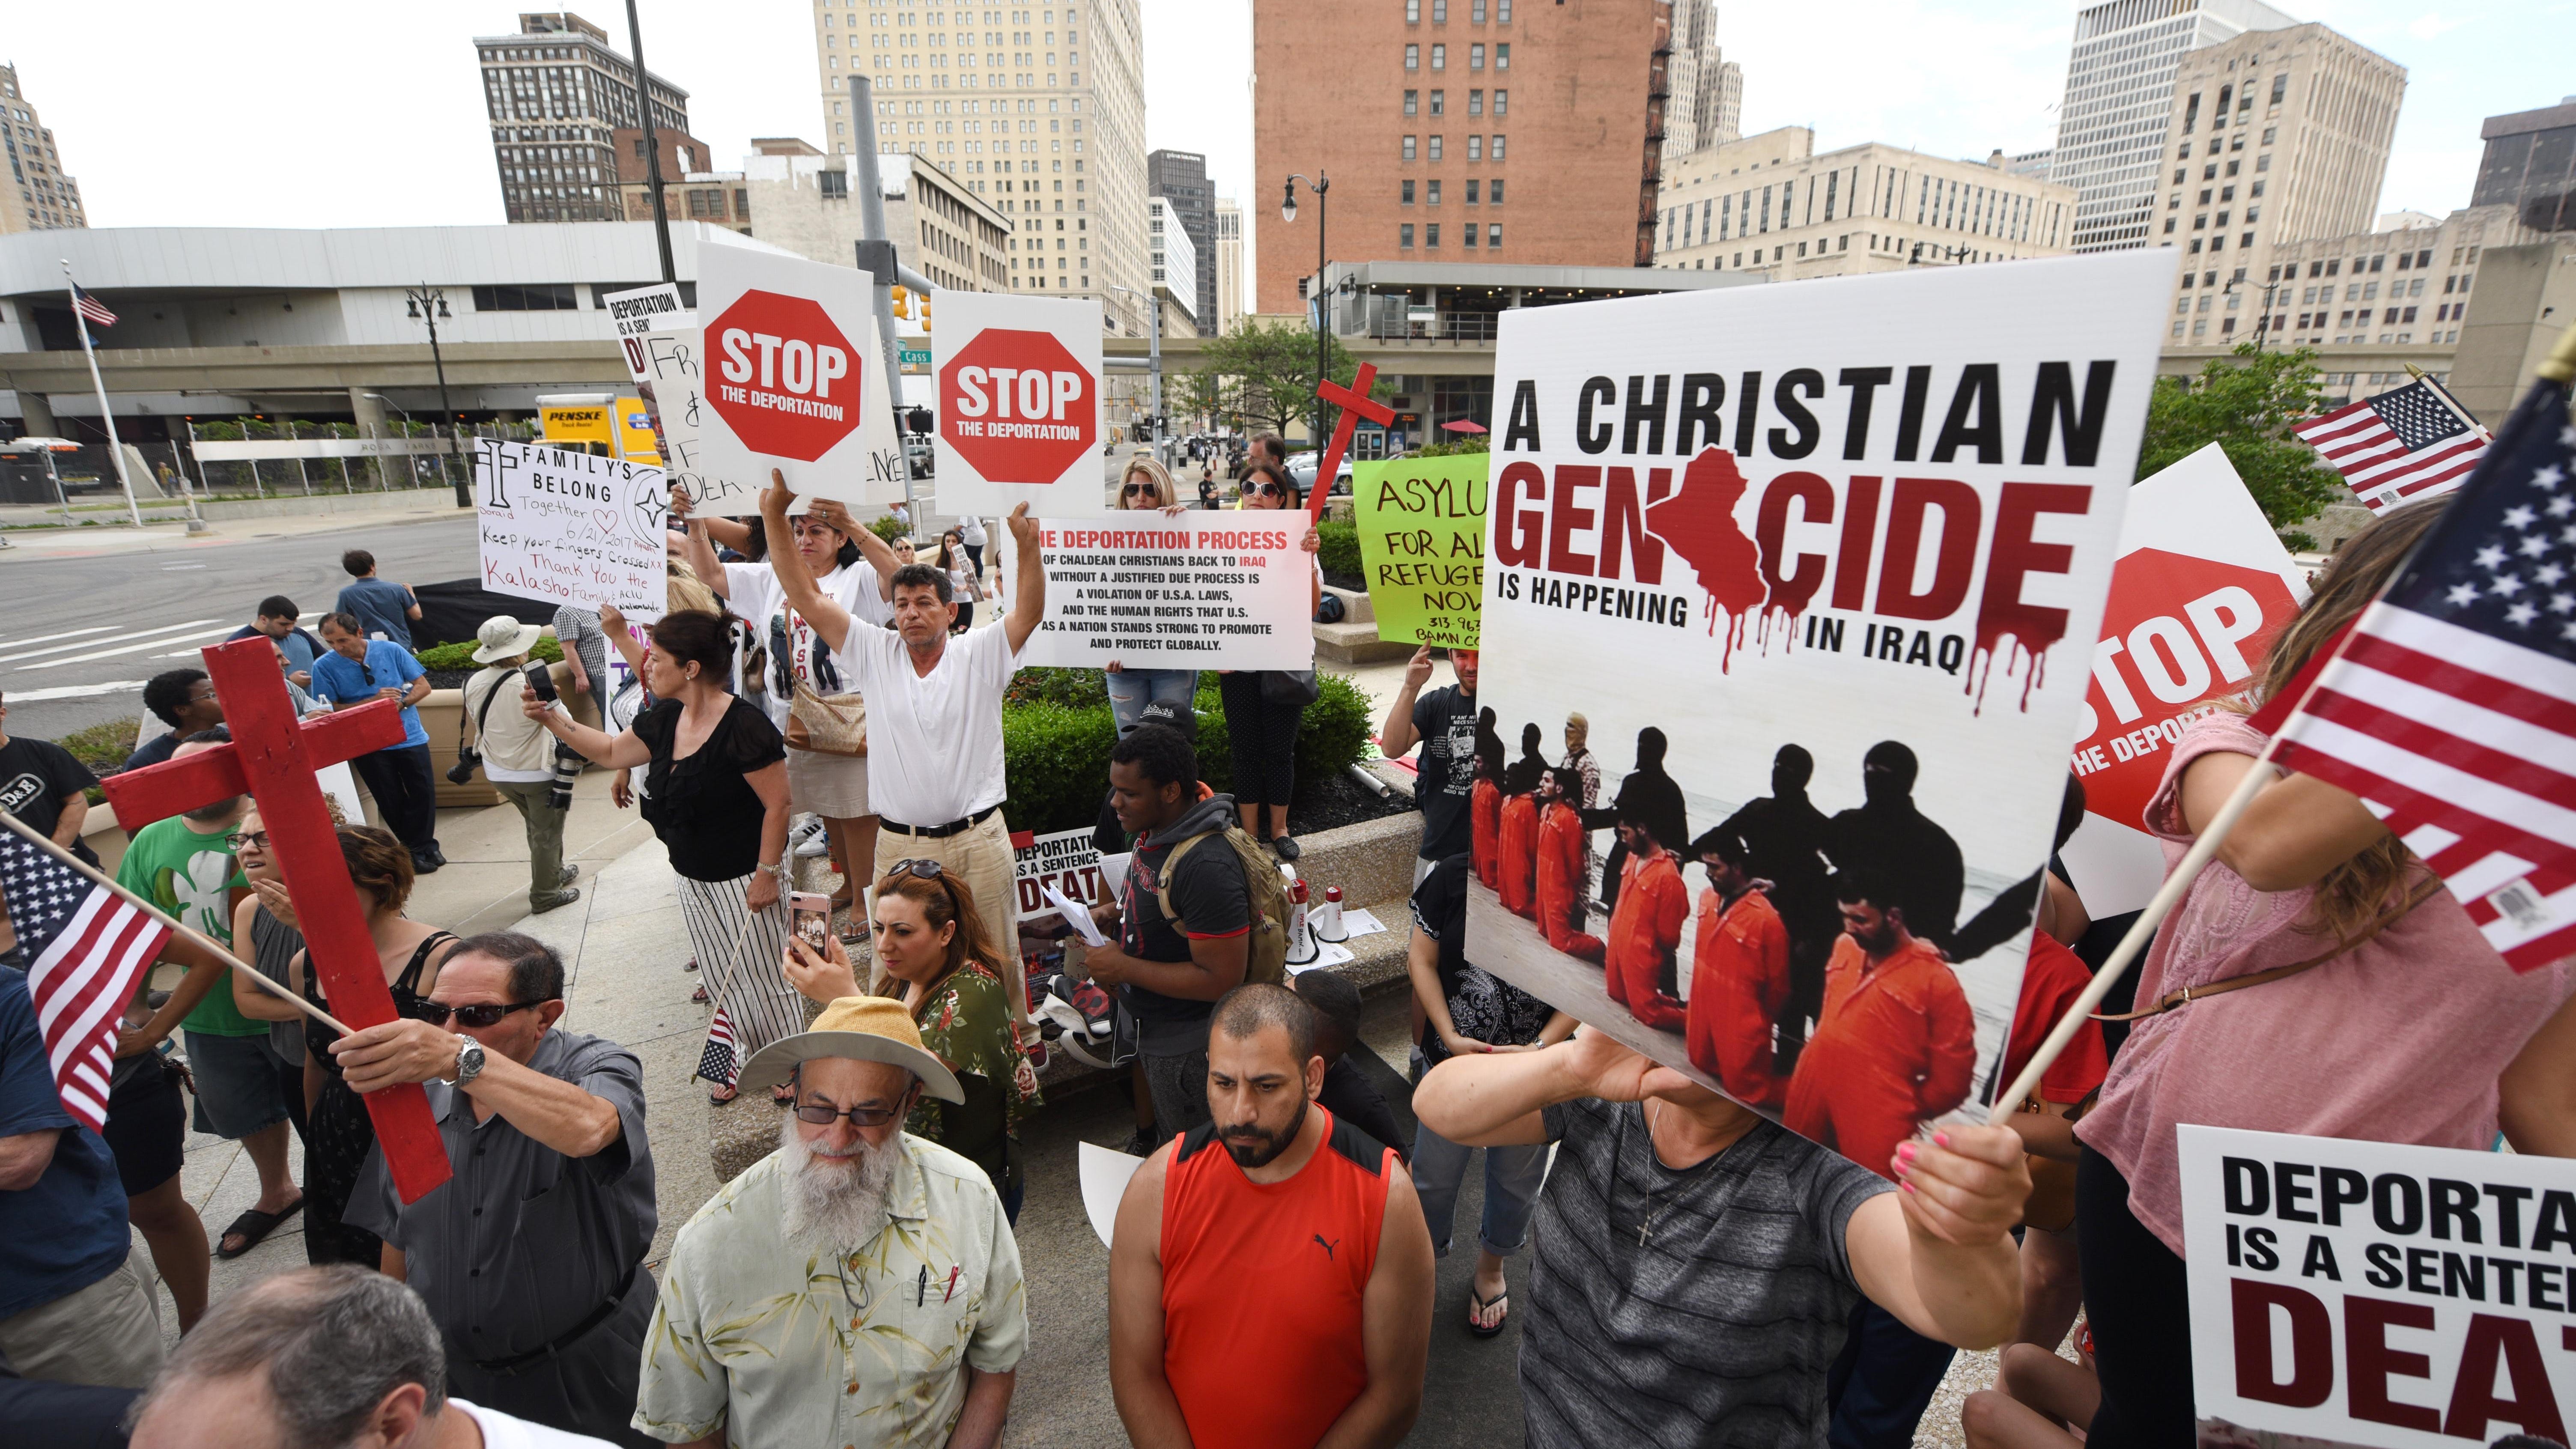 People carry signs protesting the deportation of Iraqi-American immigrants as members of the Chaldean community rallied at the McNamara Federal building in Detroit in June 2017.